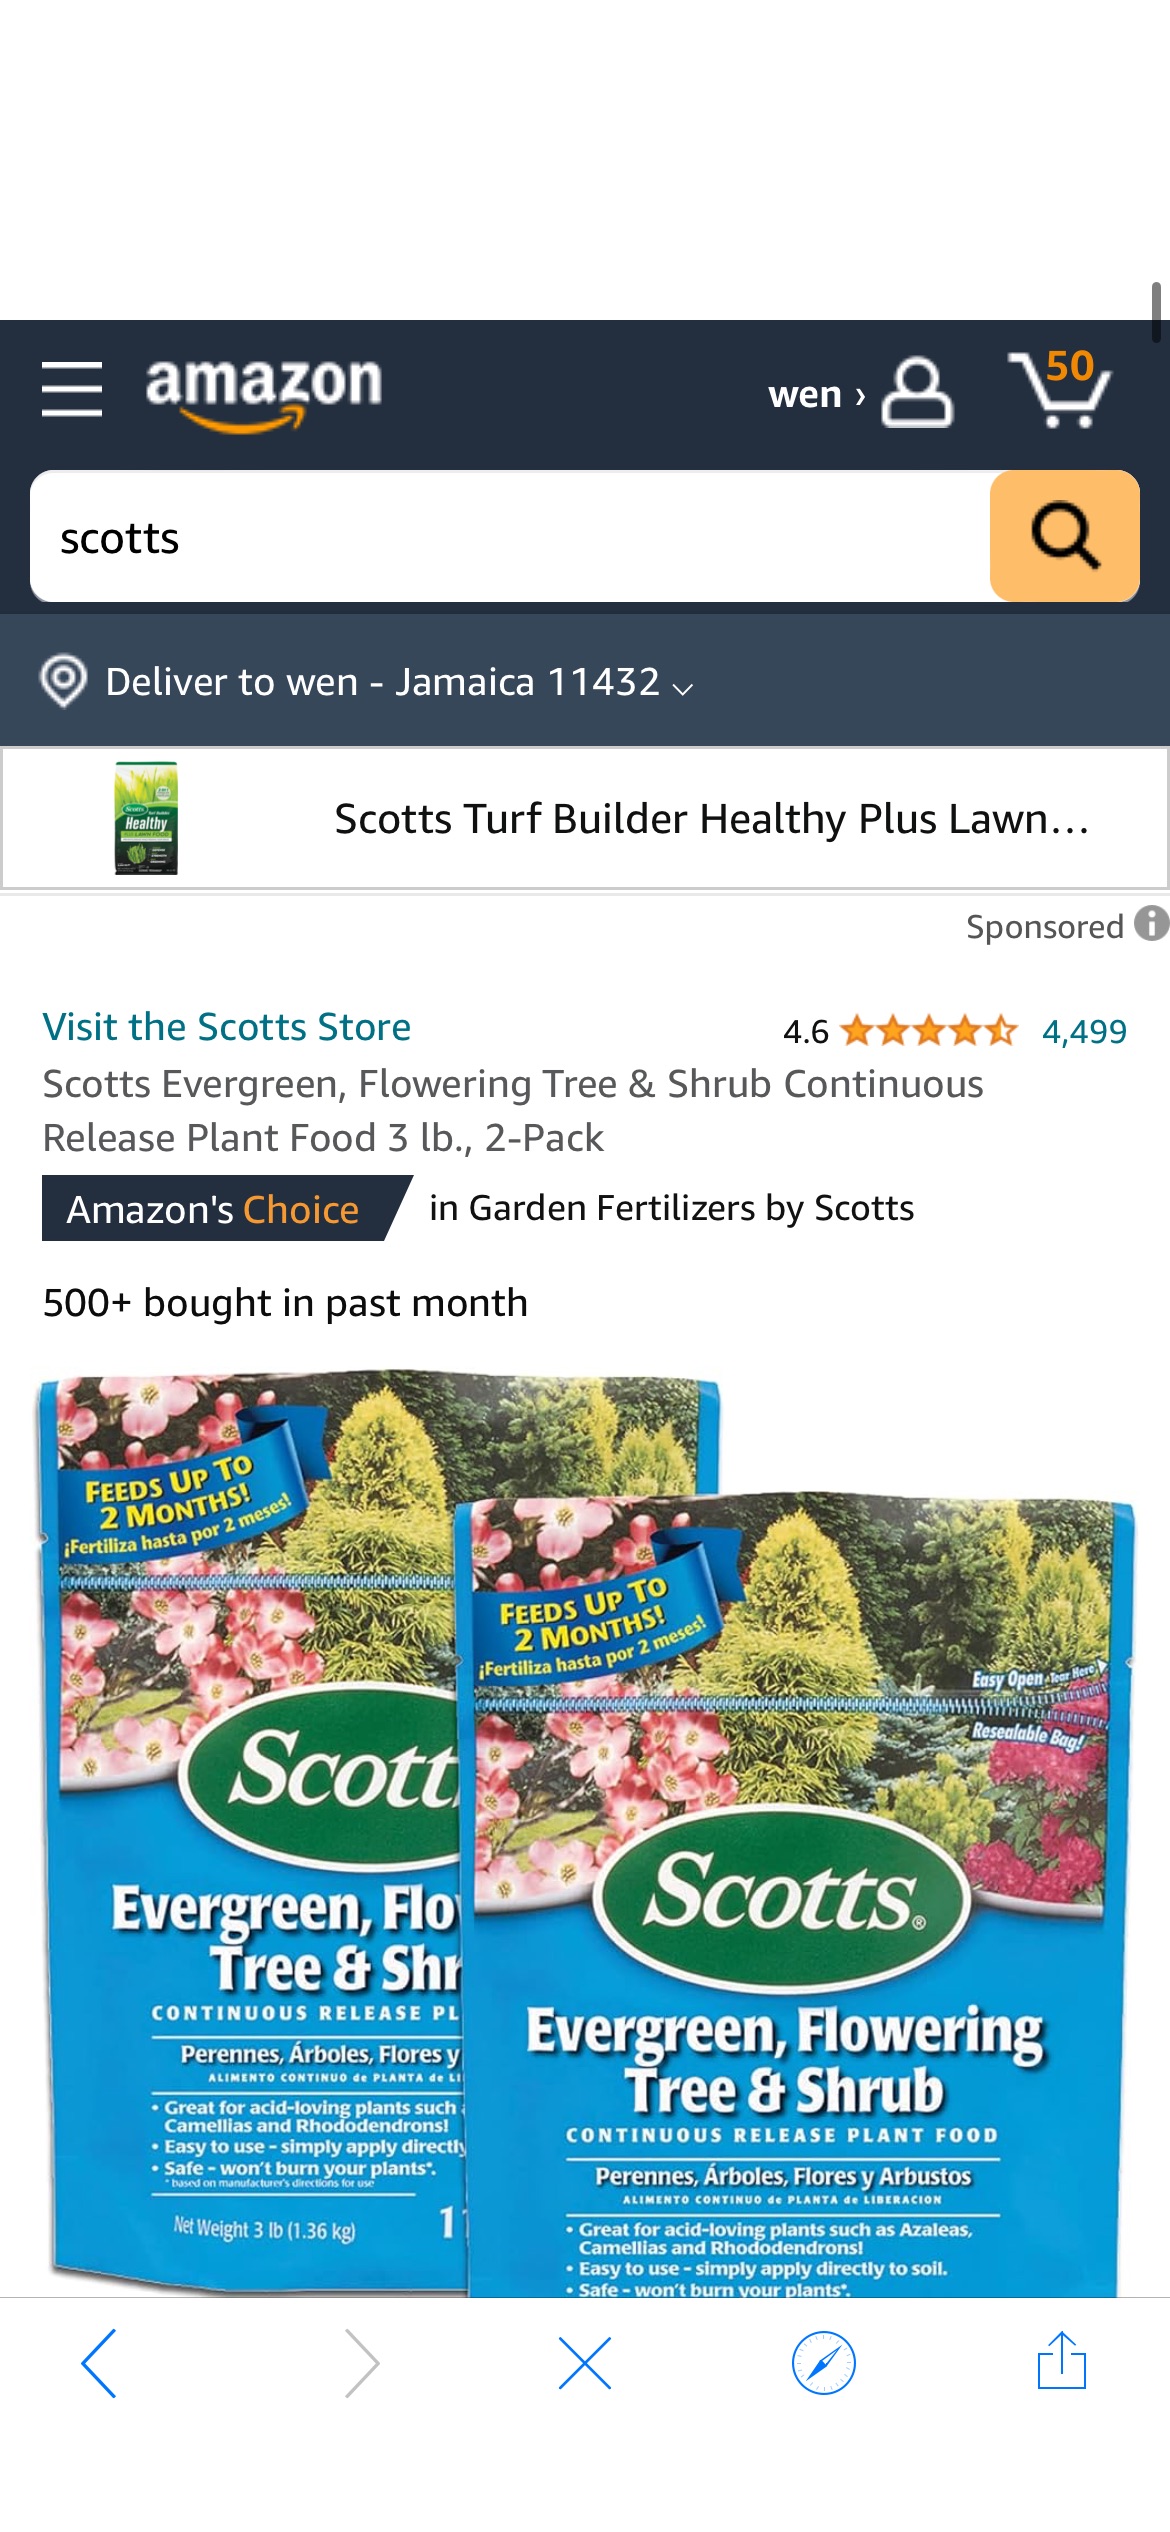 Amazon.com : Scotts Evergreen, Flowering Tree & Shrub Continuous Release Plant Food 3 lb., 2-Pack : Patio, Lawn & Garden